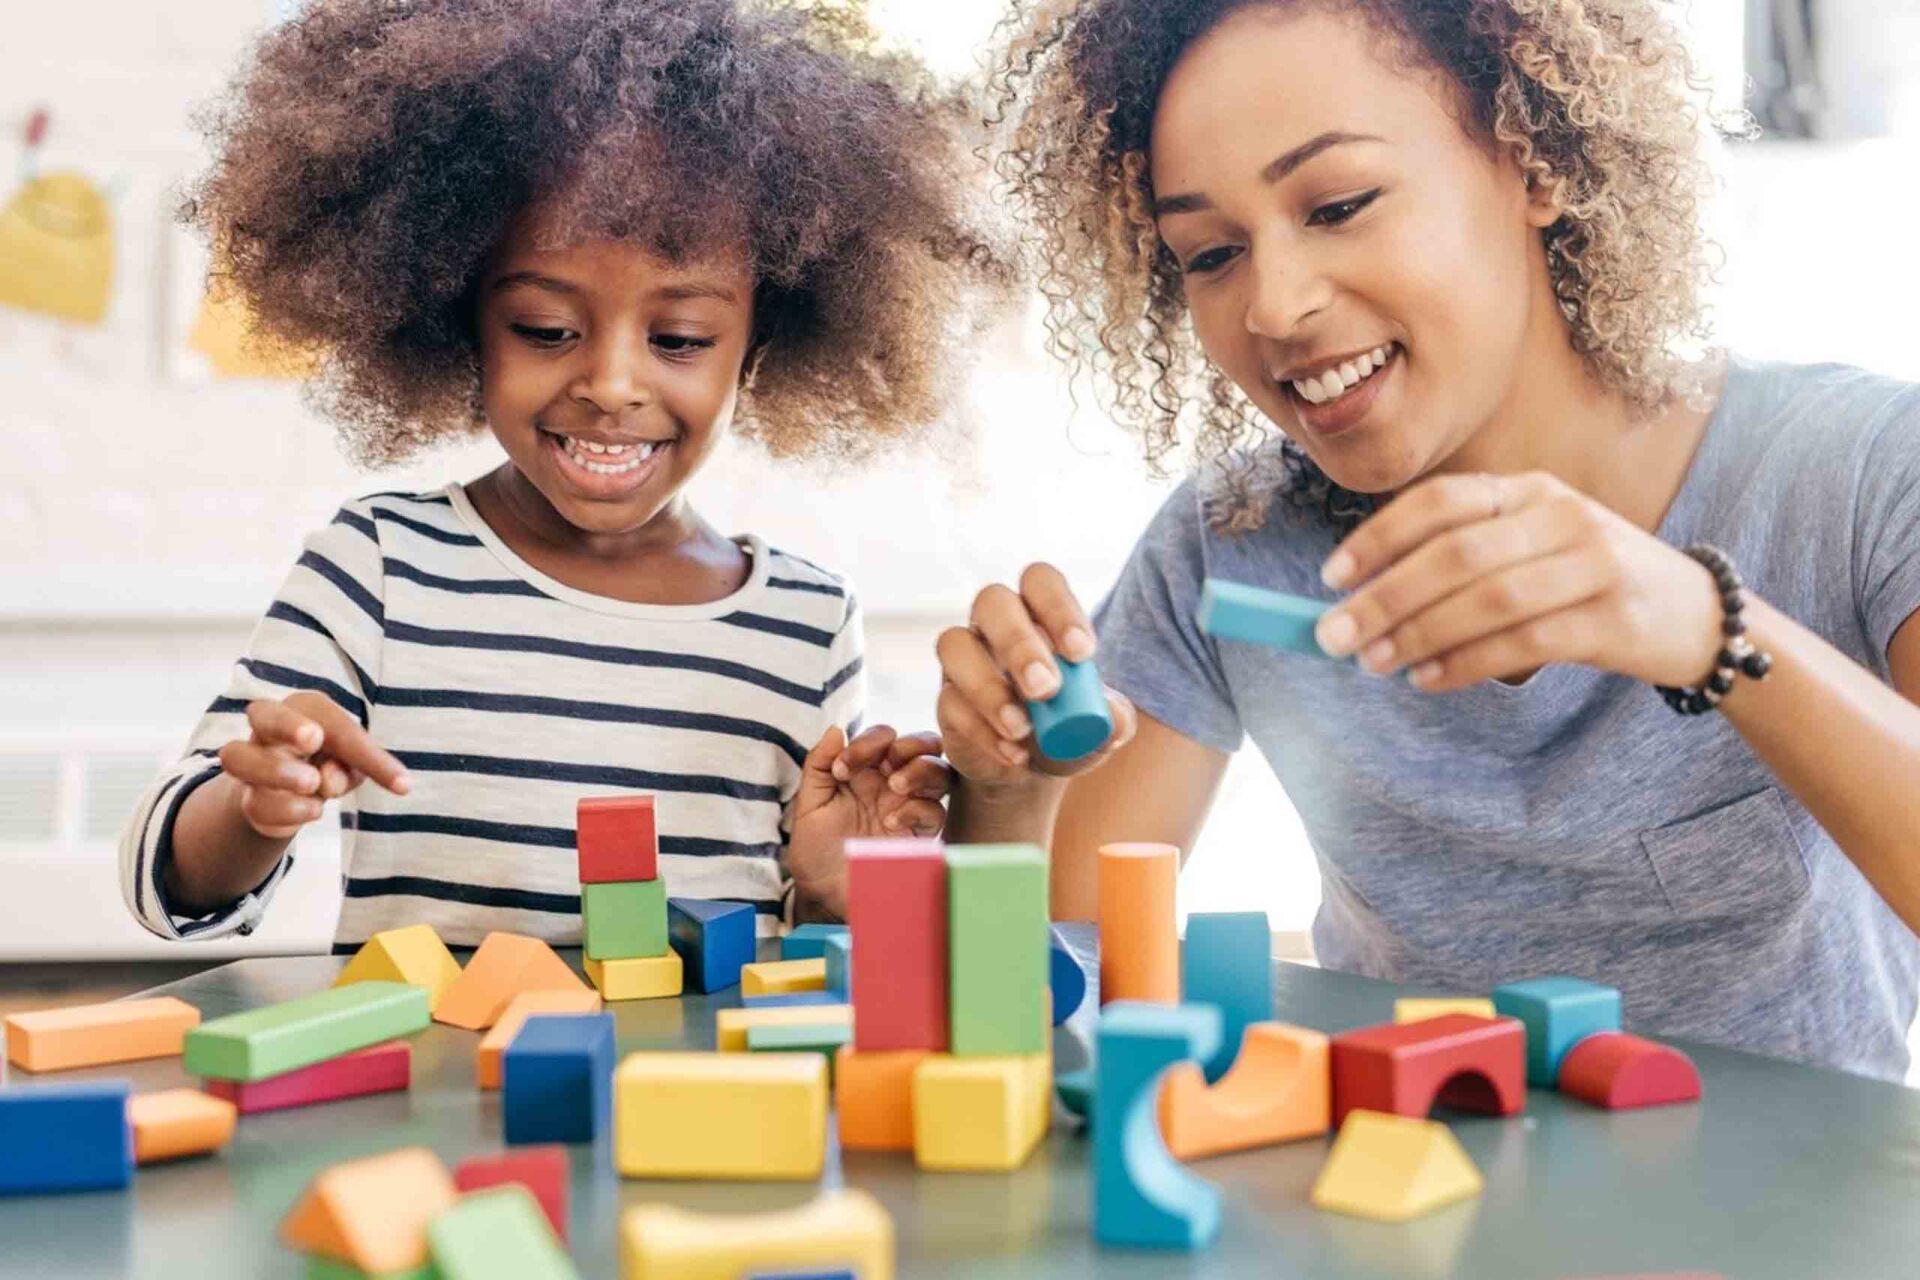 A Teacher and a child playing with the blocks